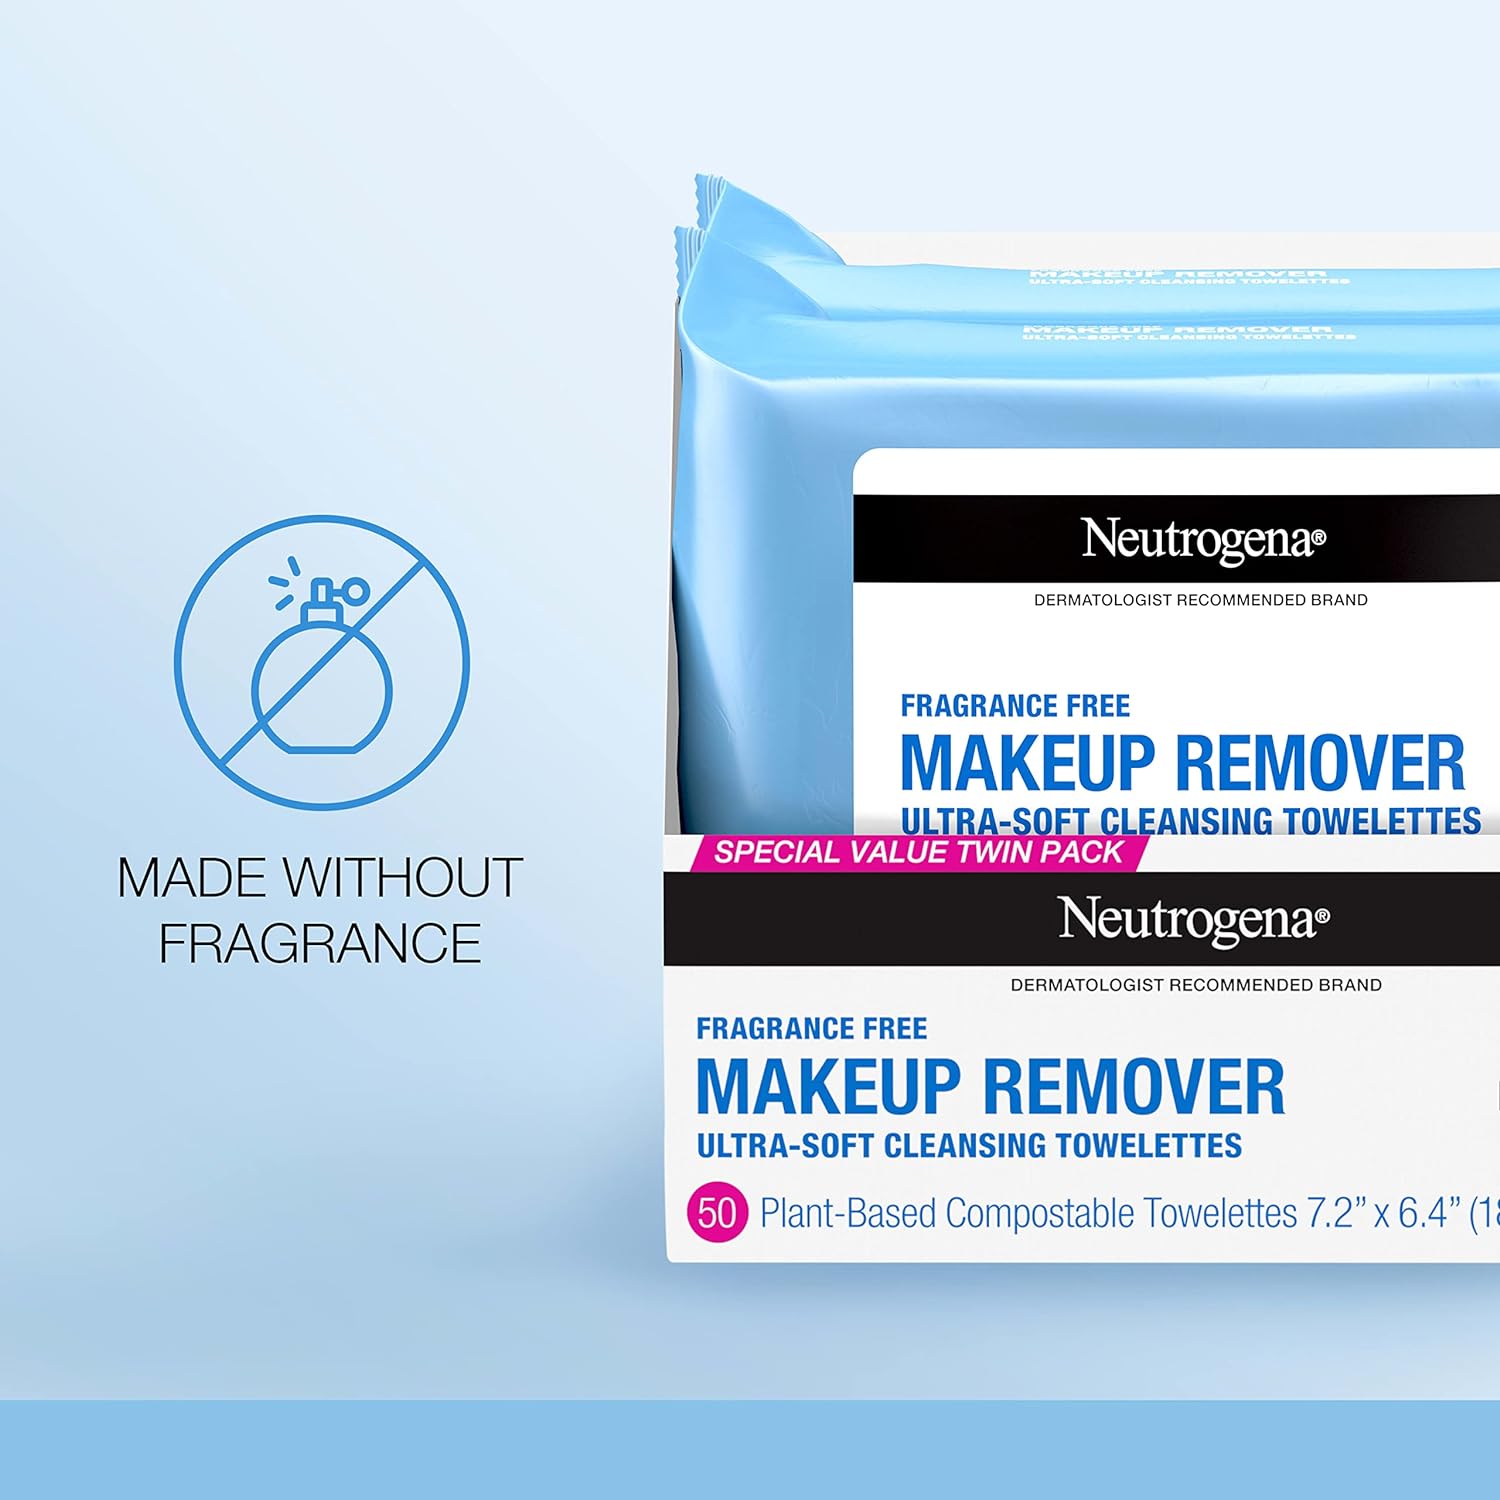 Neutrogena Cleansing Fragrance Free Makeup Remover Face Wipes, Cleansing Facial Towelettes for Waterproof Makeup, Alcohol-Free, Unscented, 100% Plant-Based Fibers, Twin Pack, 2 x 25 ct : Beauty & Personal Care